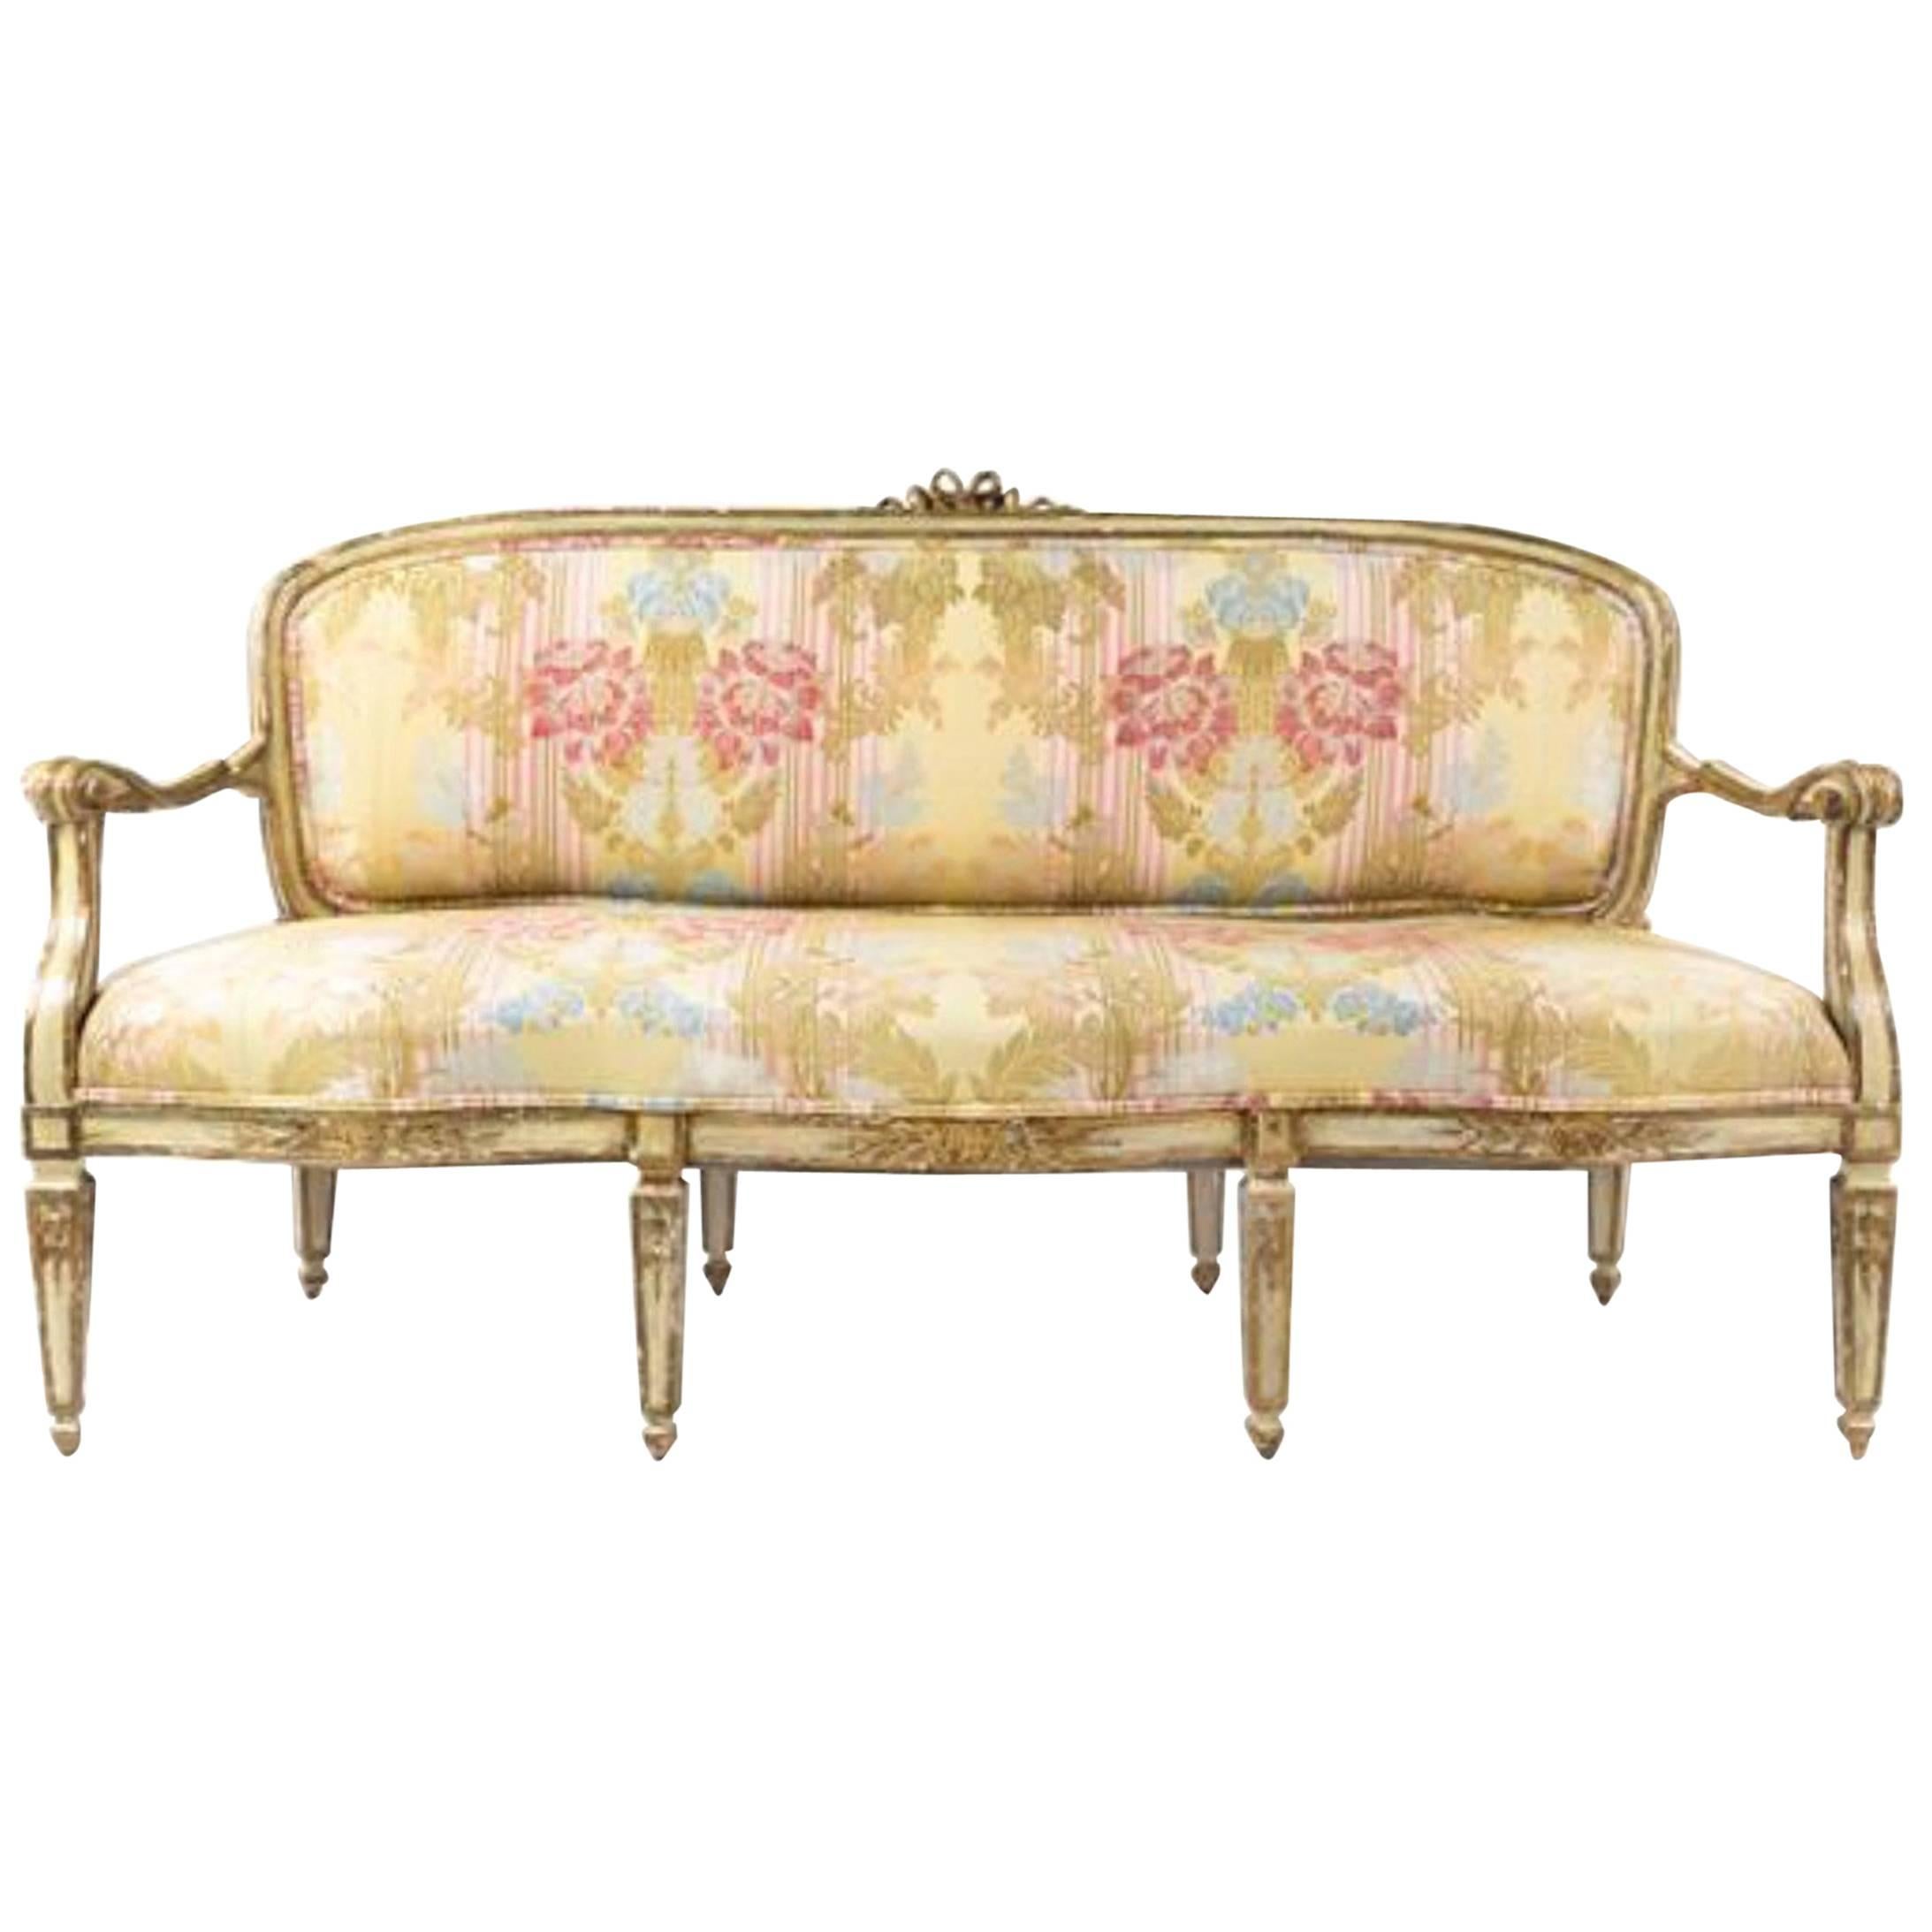 Italian Painted and Parcel-Gilt Settee, 18th Century